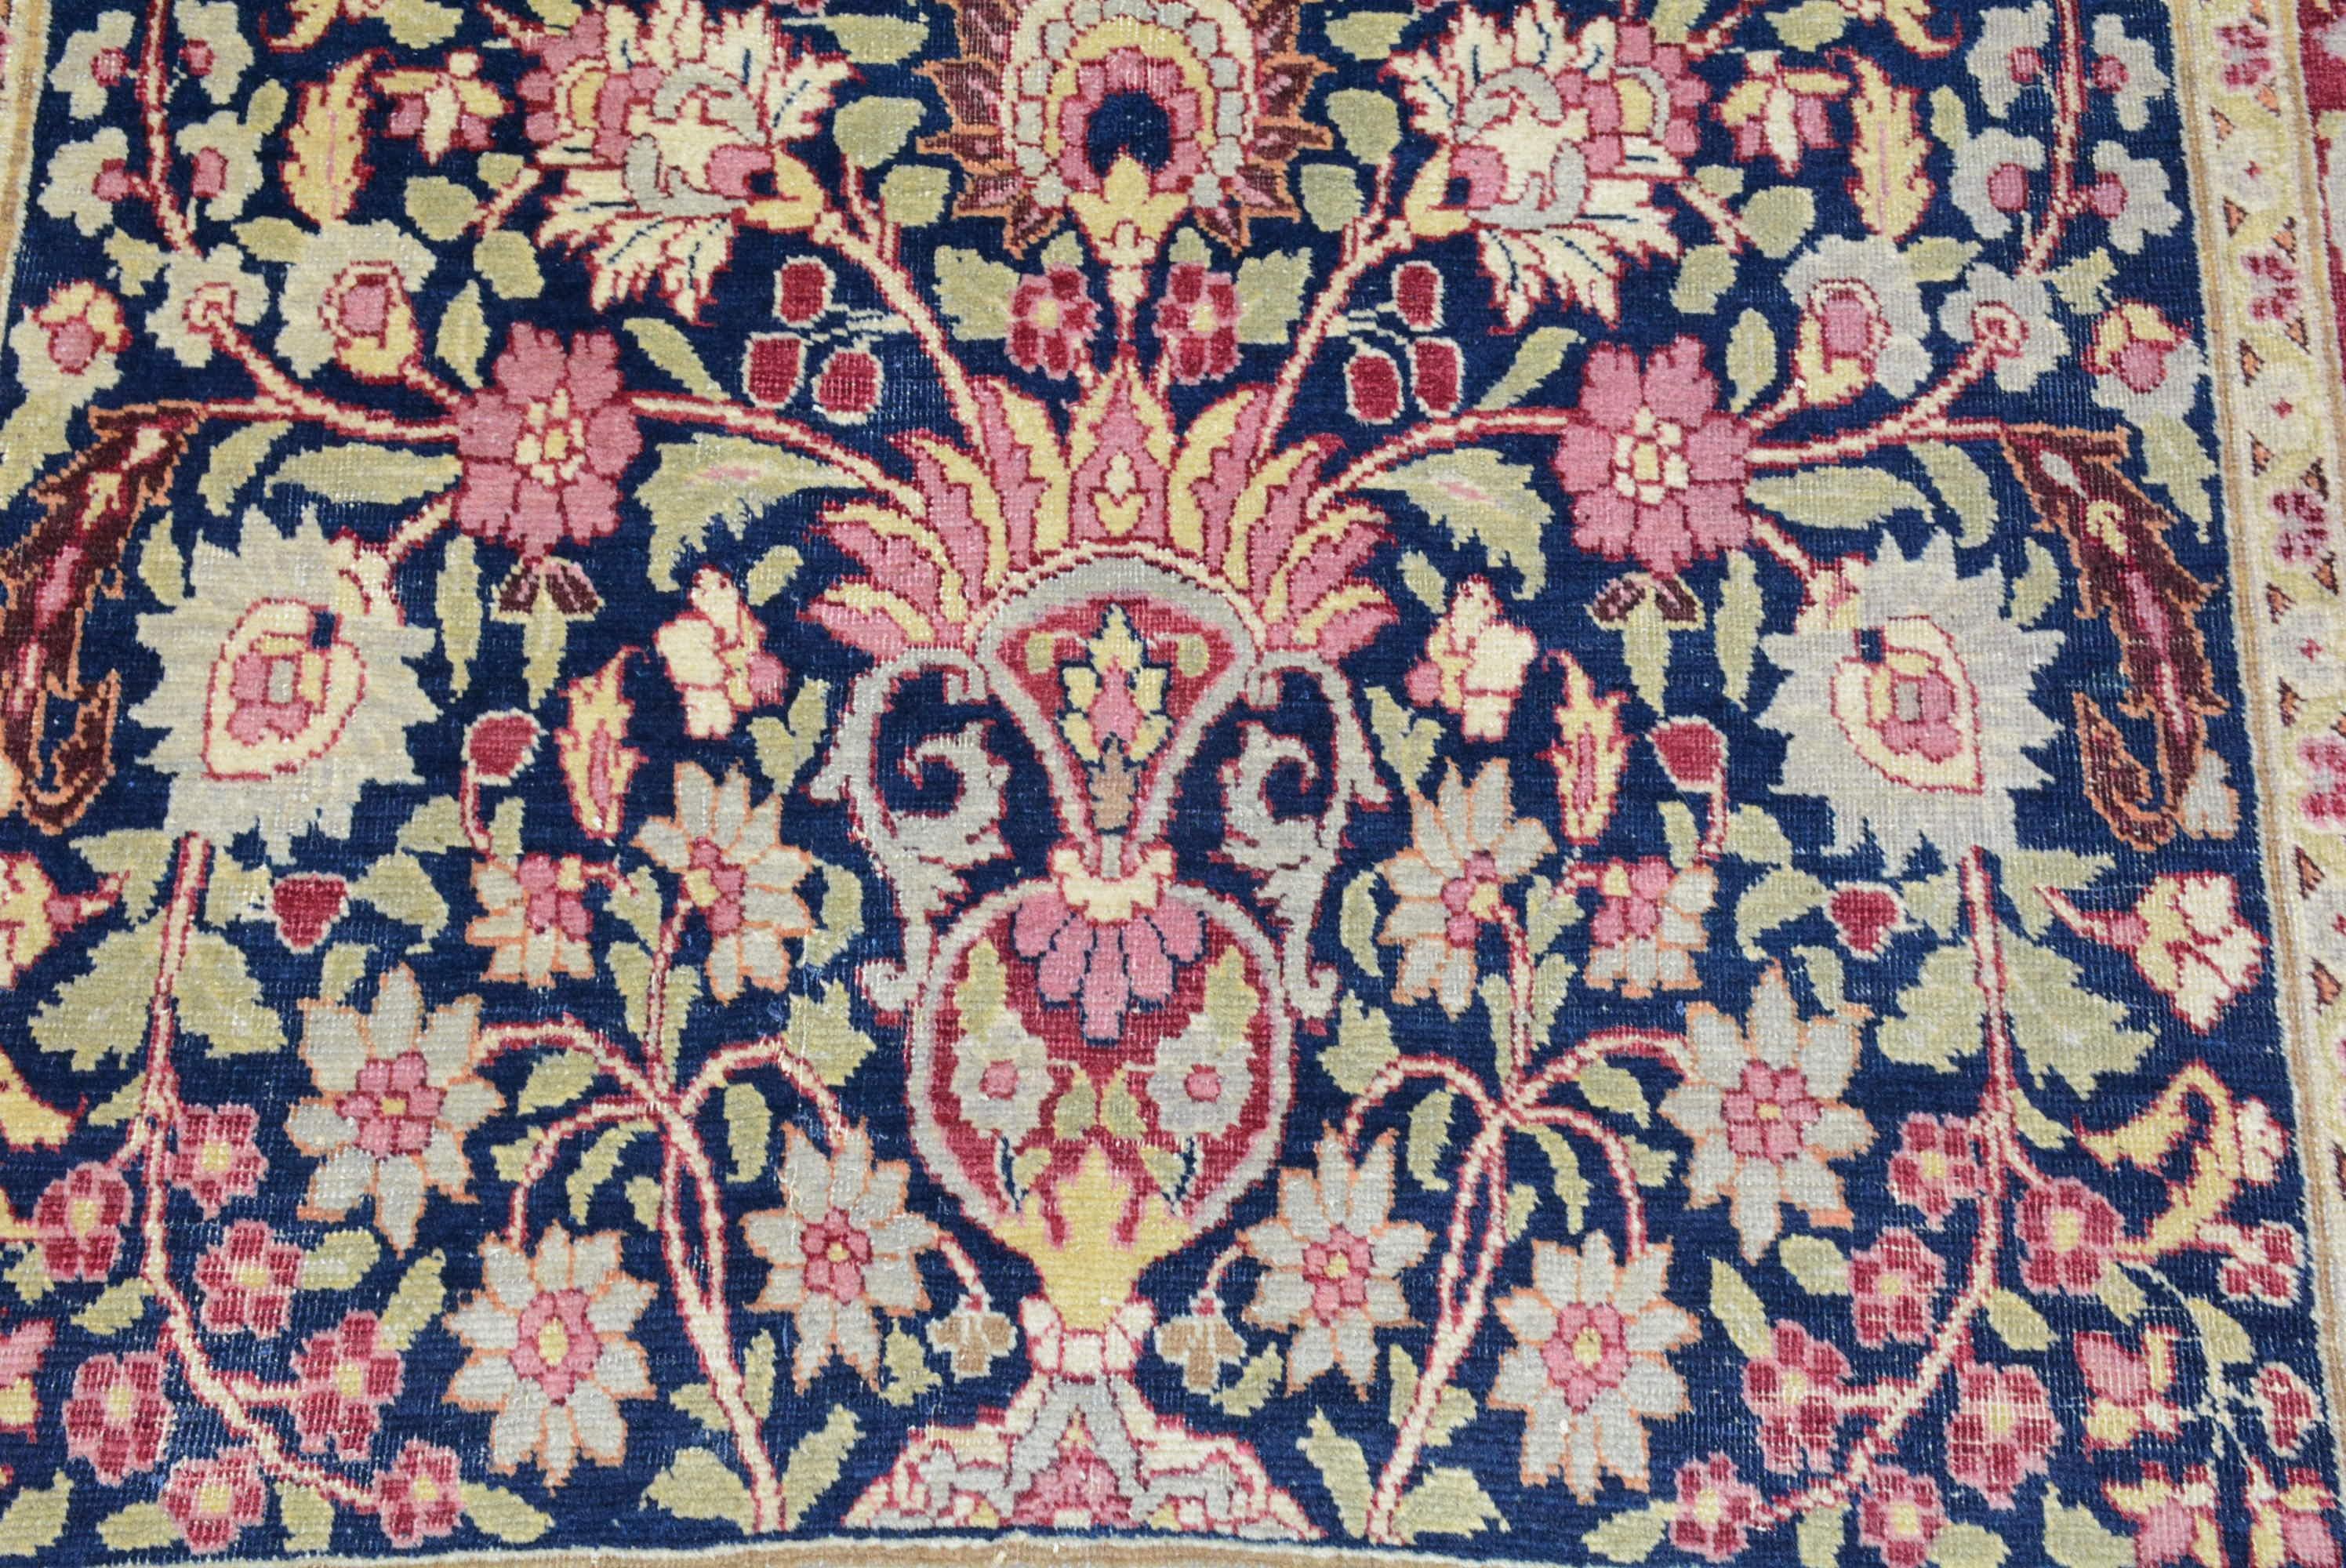 An ascending floral pattern fills the midnight blue field of this early 20th century Mashad rug from east Persia, 5' 7